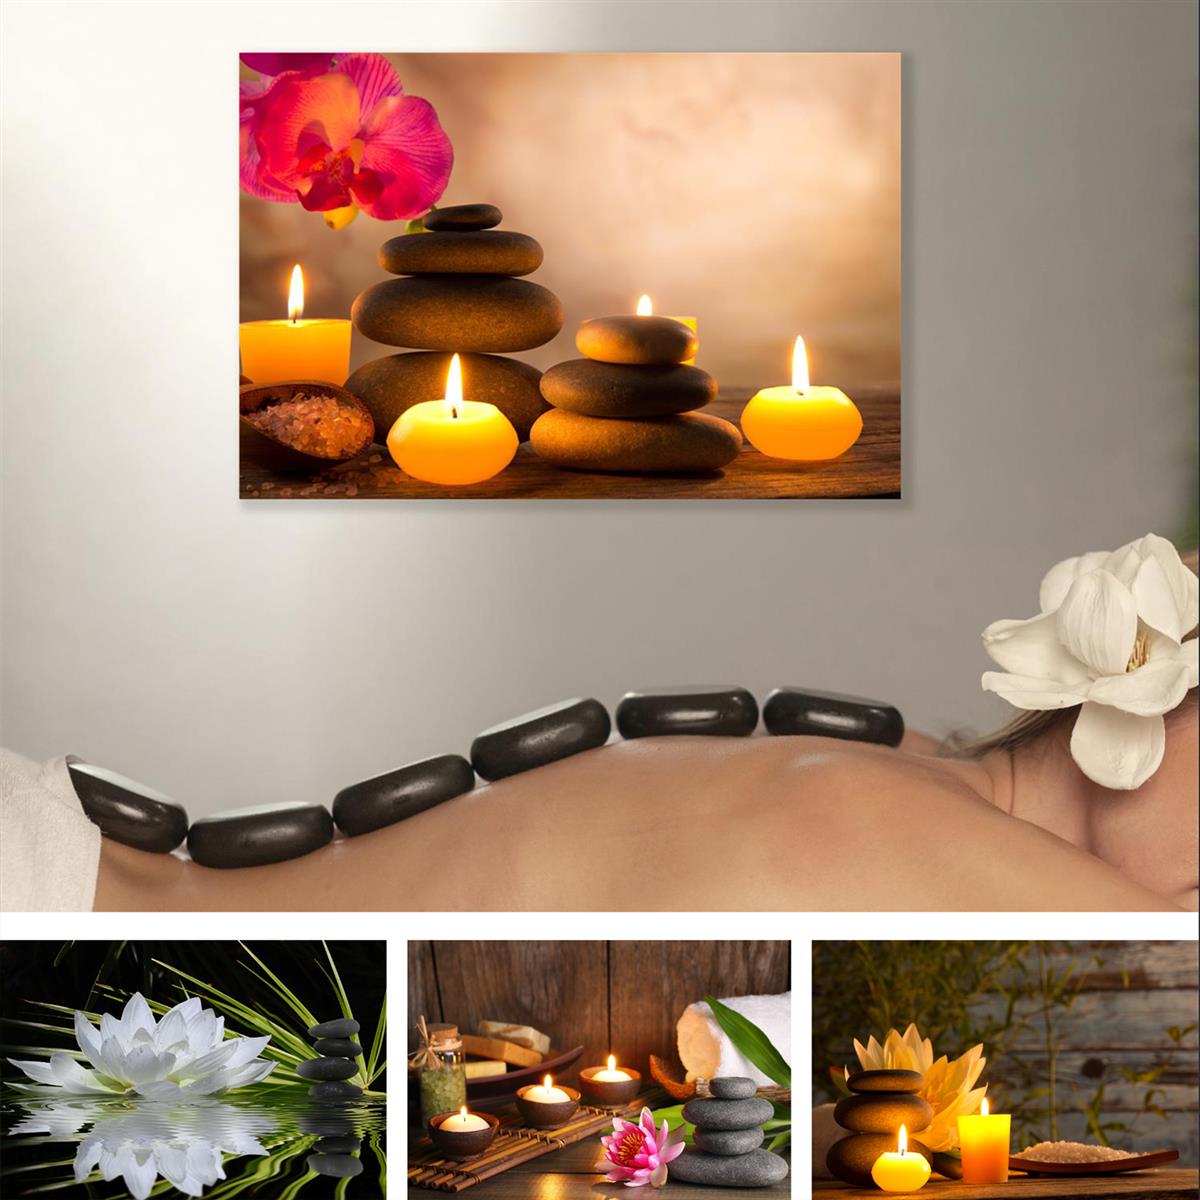 Modern Zen Canvas Wall Art For Spa, Yoga, Meditation, And Home Decor -  Stone White Candle, Green Bamboo, Lotus Flower Design - Prints On Canvas,  No Frame - Perfect For Office And